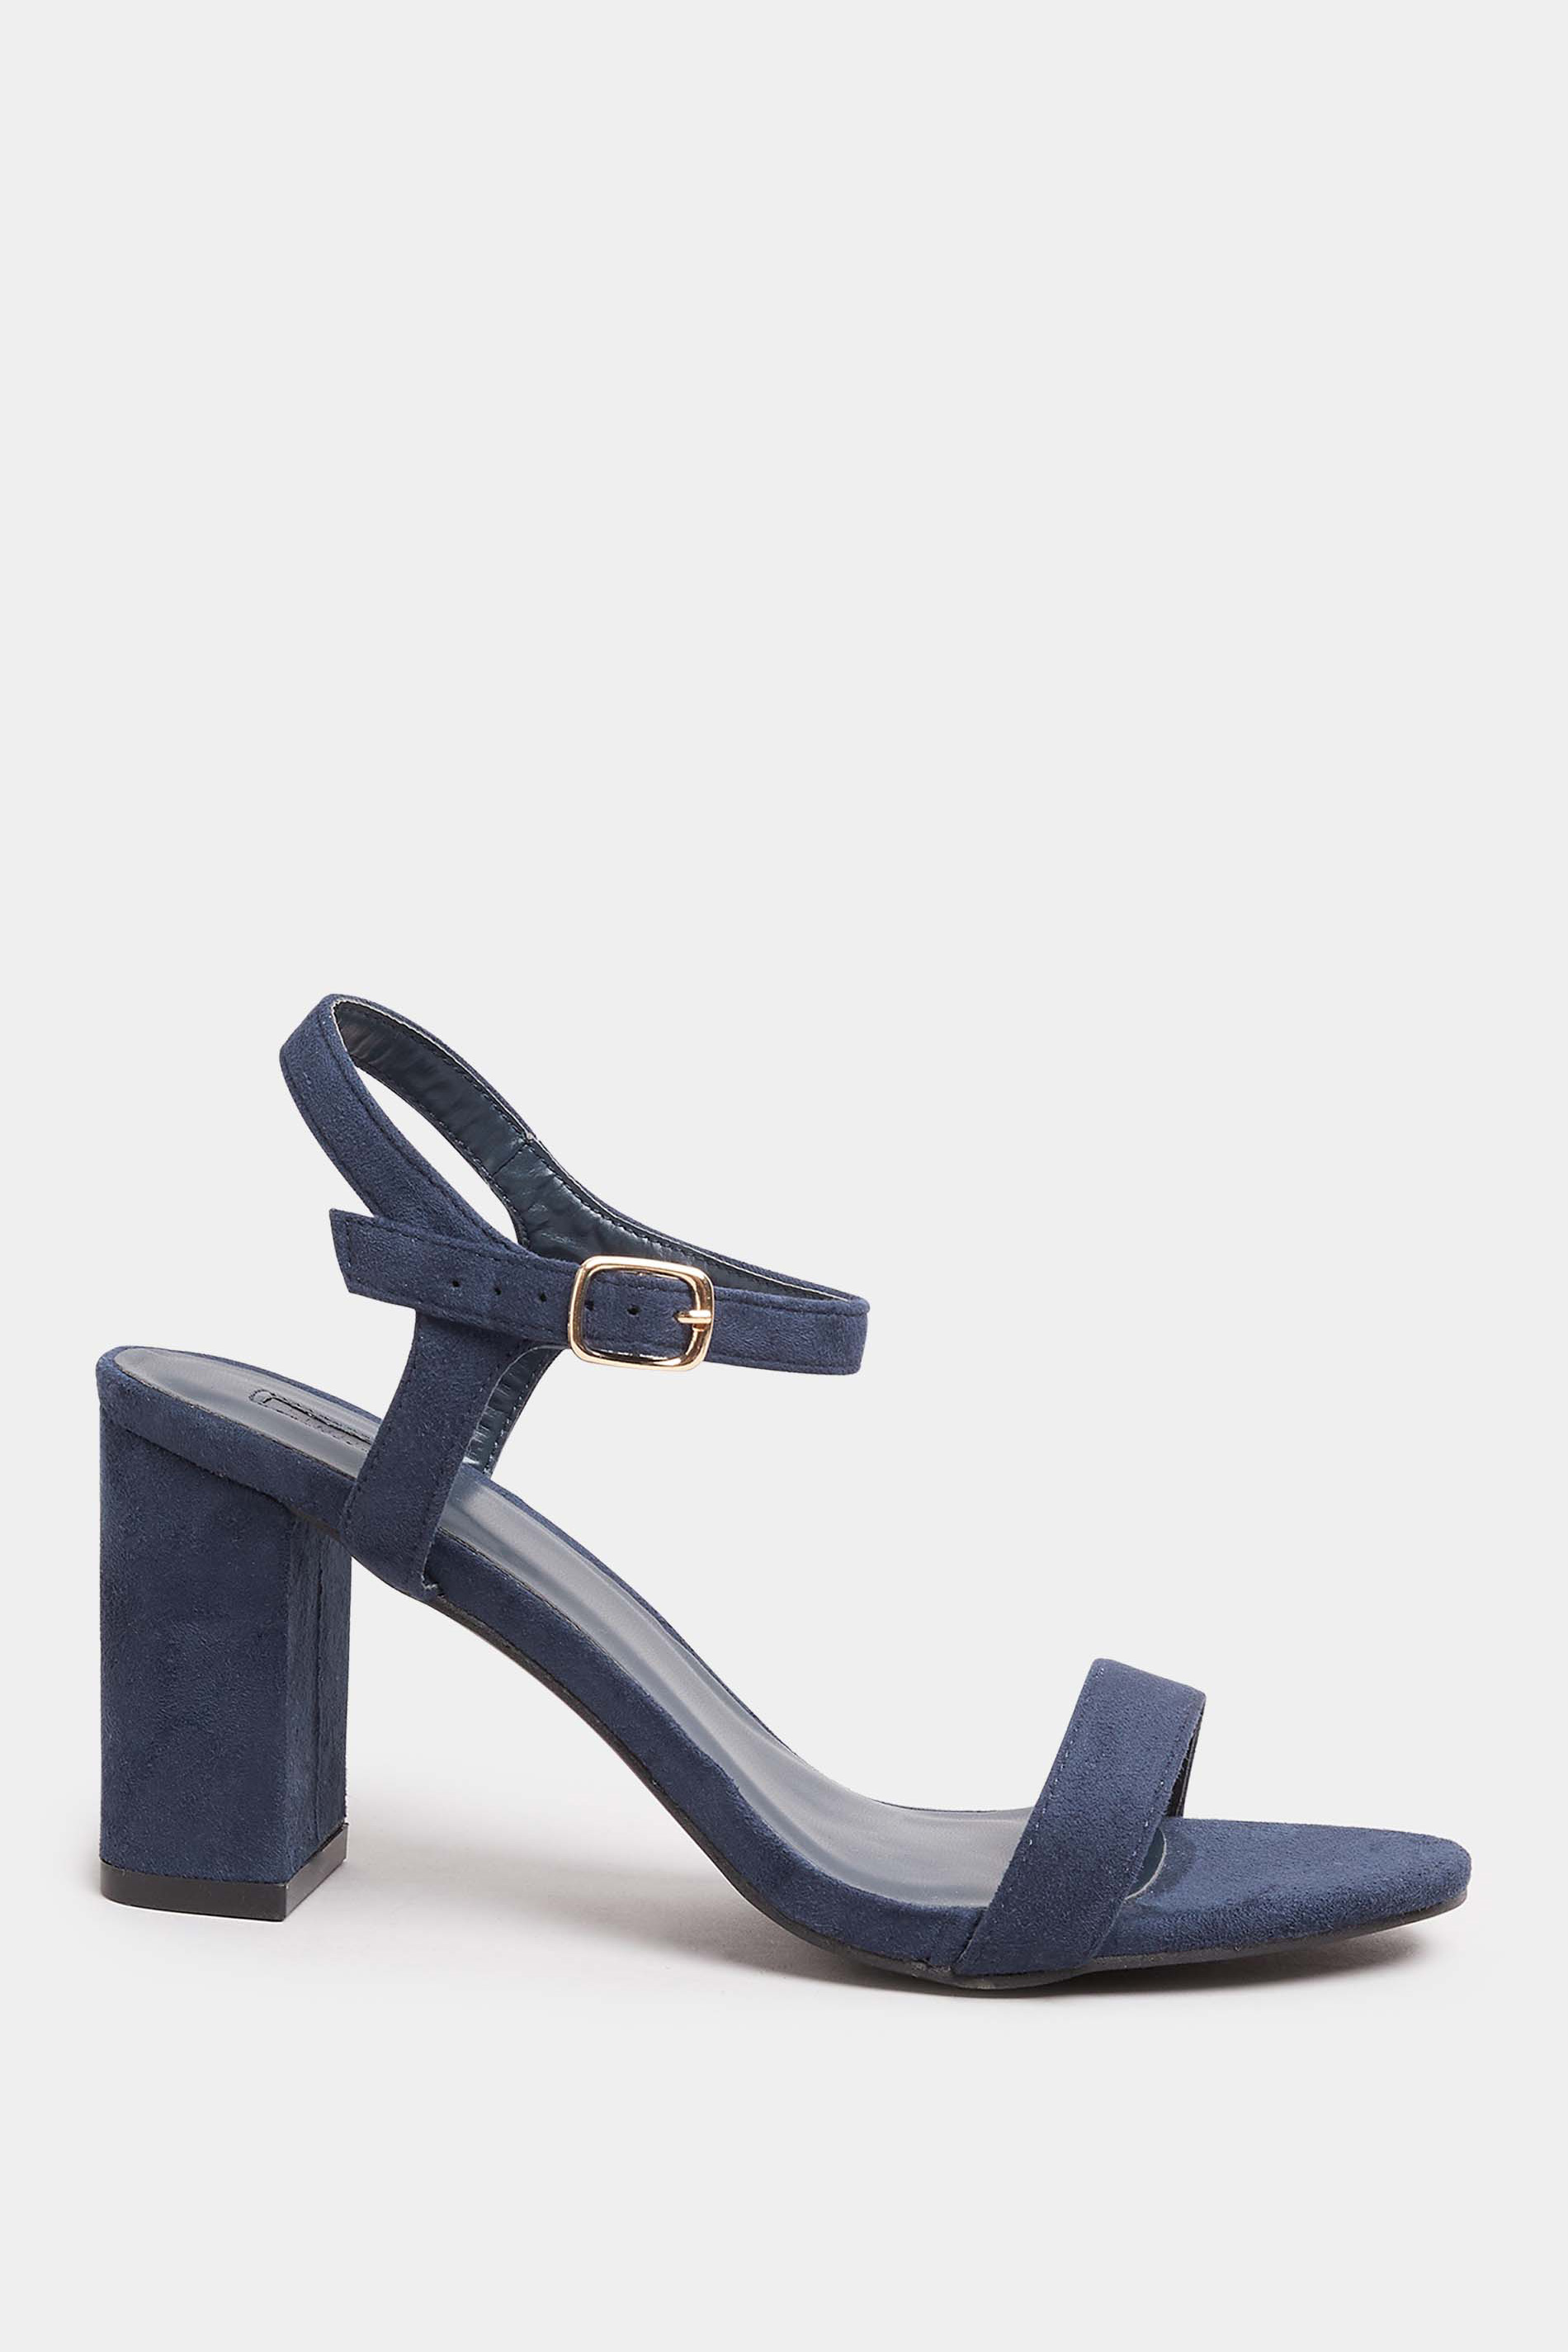 LIMITED COLLECTION Navy Blue Block Heel Sandal In Wide E Fit & Extra Wide EEE Fit | Yours Clothing 3